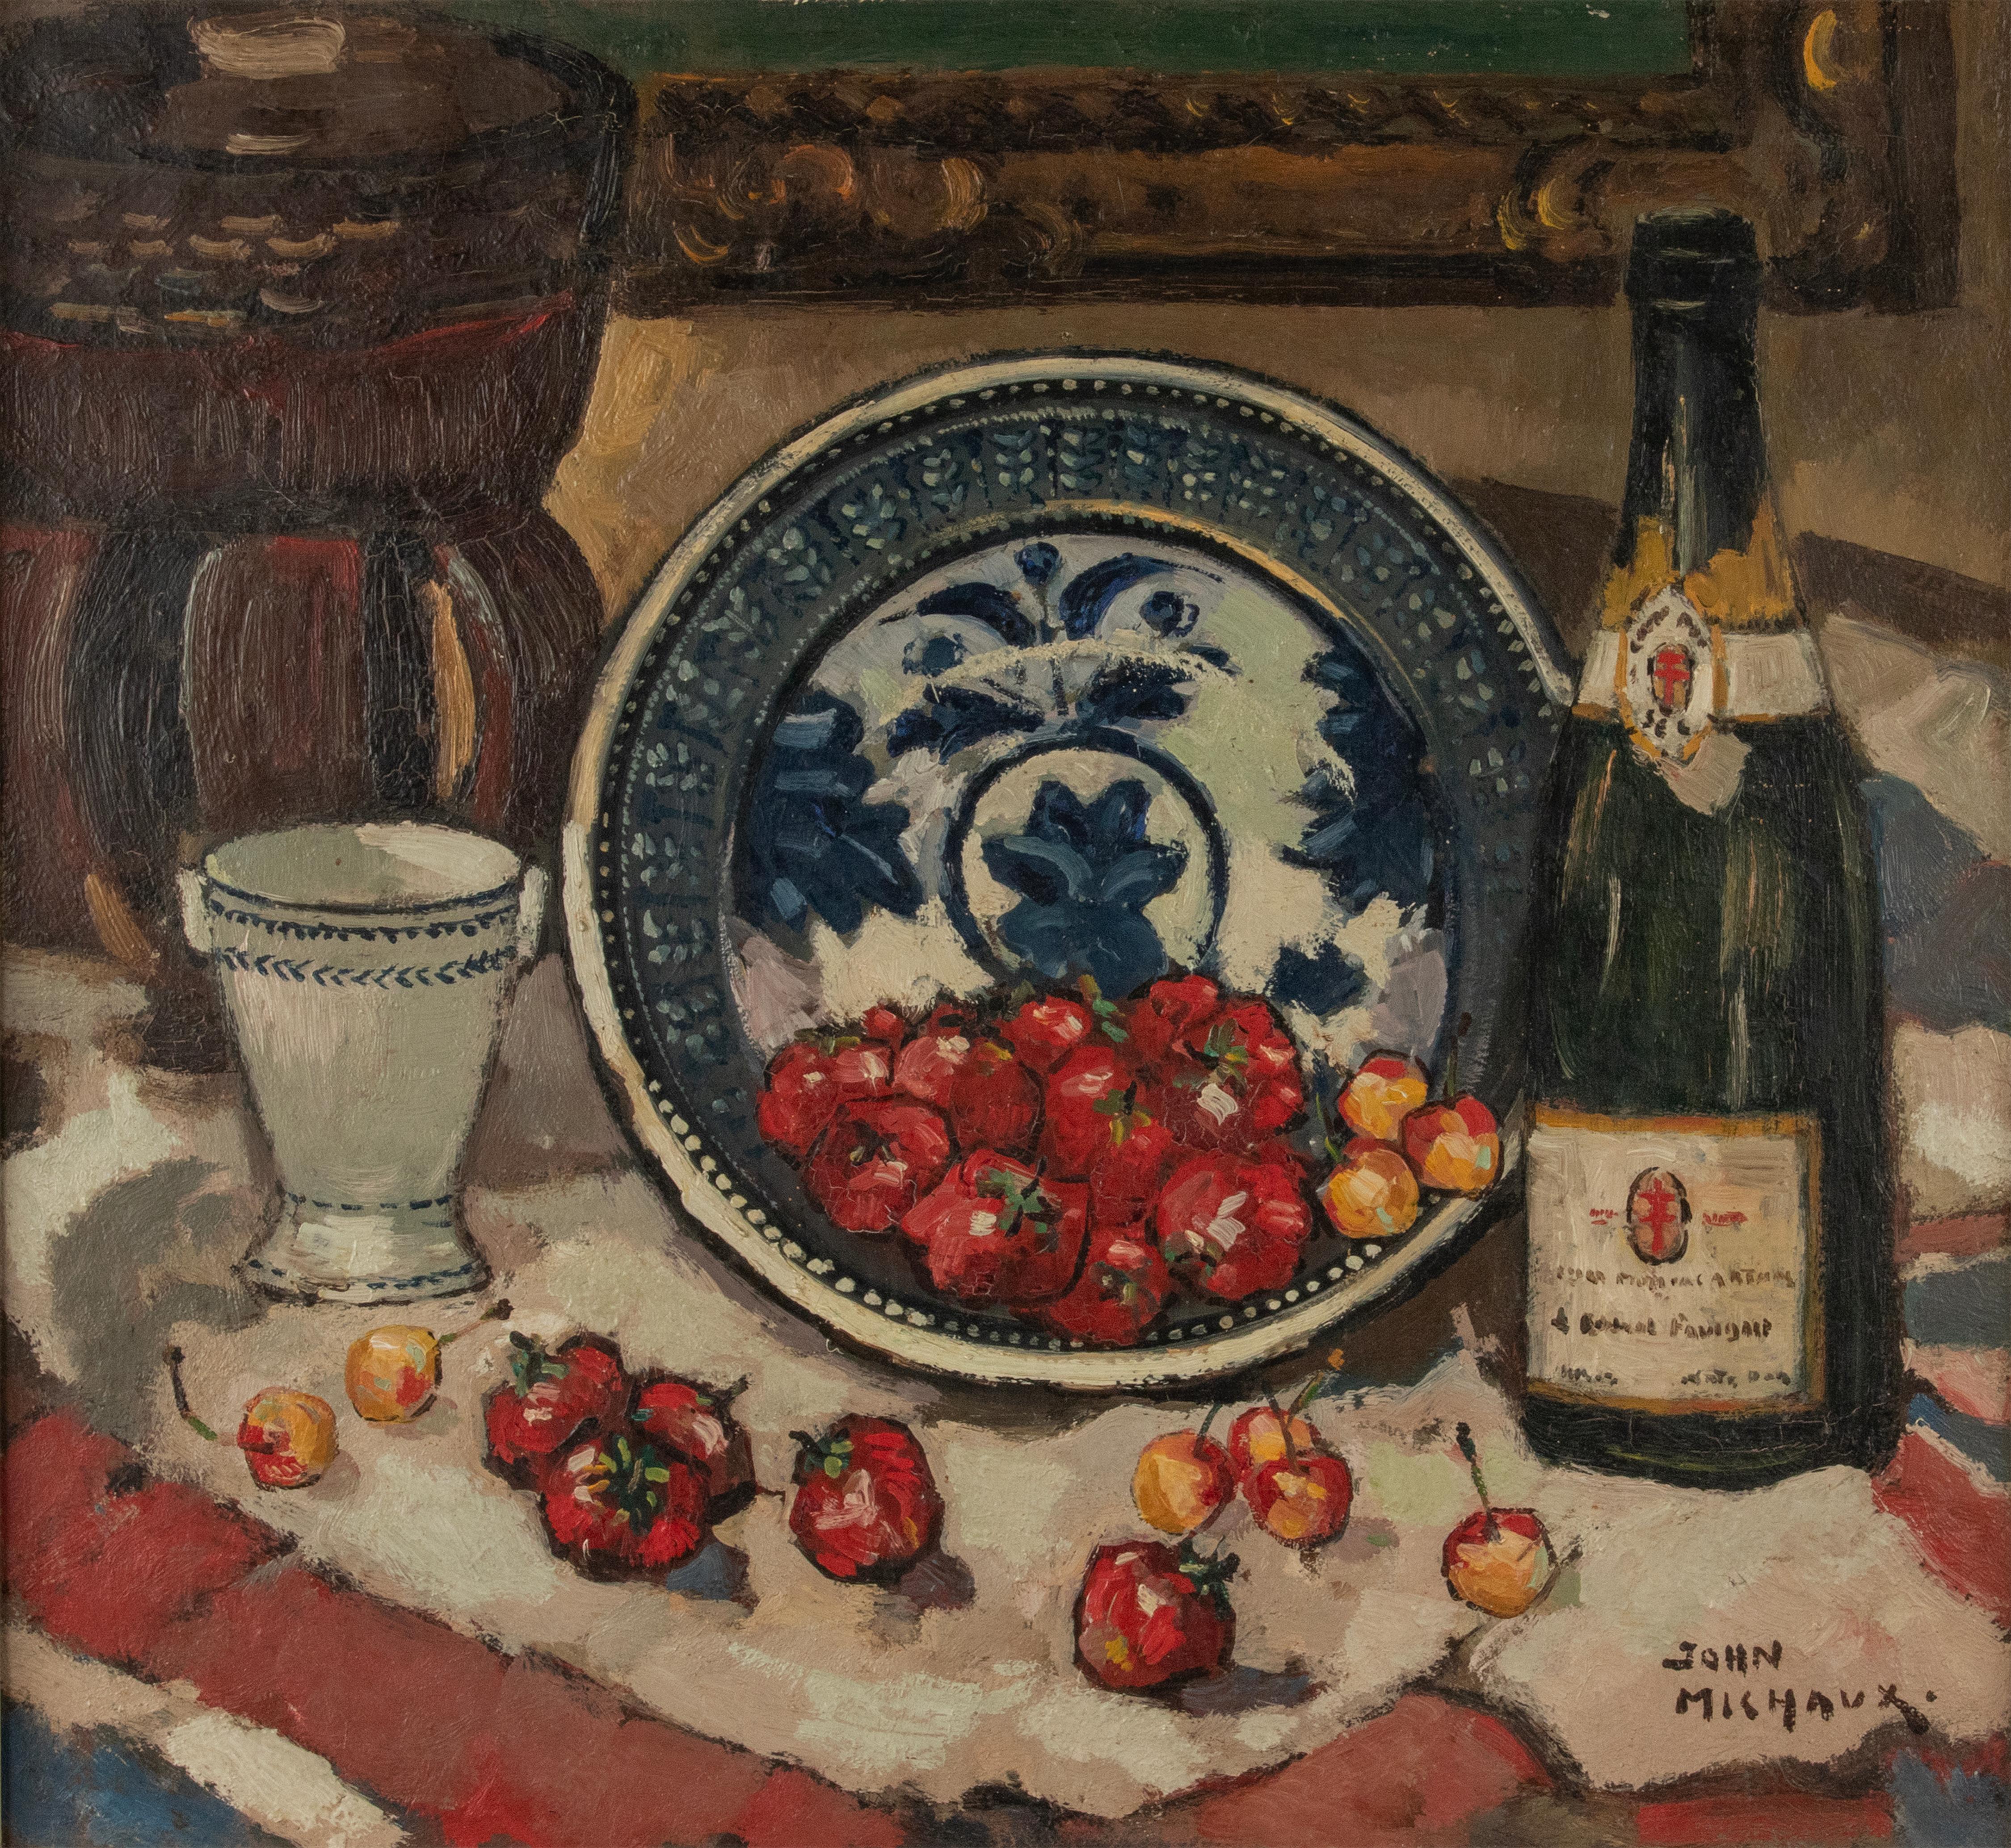 A beautiful still life oil painting, made by the Belgian artists John Michaux. 
It is a colorful scene with strawberries and cherries in a blue and white ceramic bowl and a champagne bottle, against the background of a house interior. 
Oil on canvas